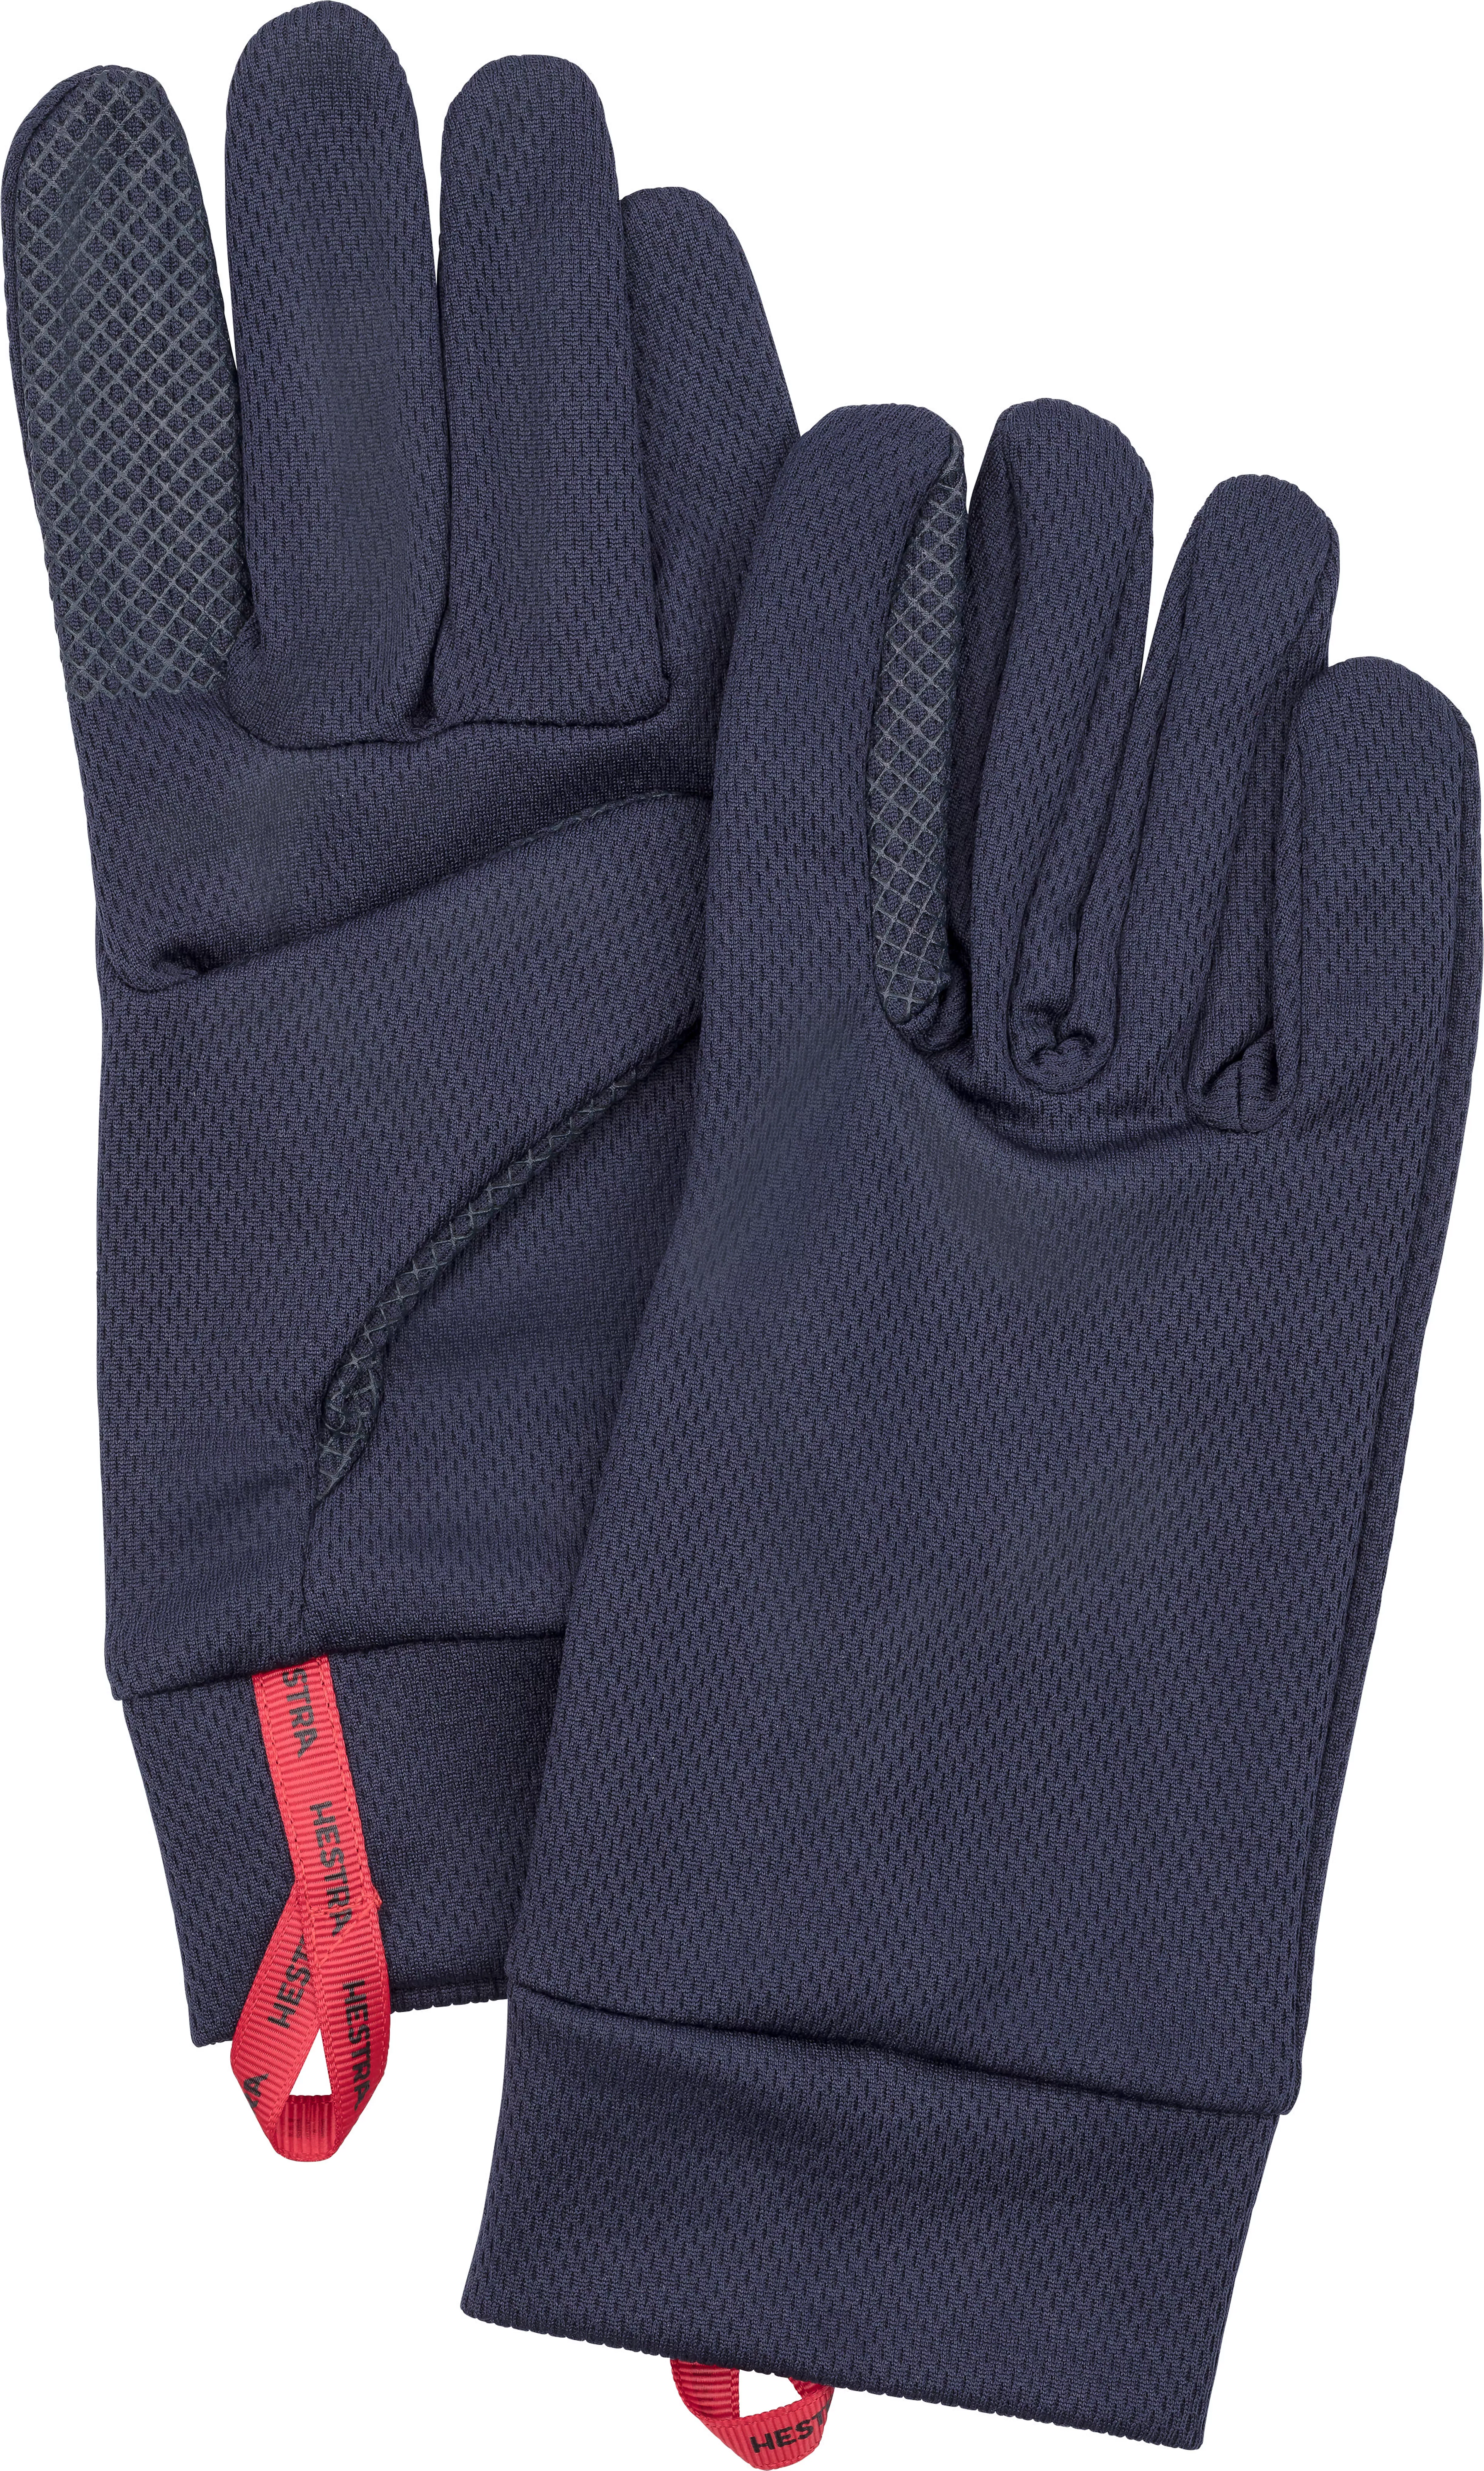 Touch Point Dry Wool - 5 fingers